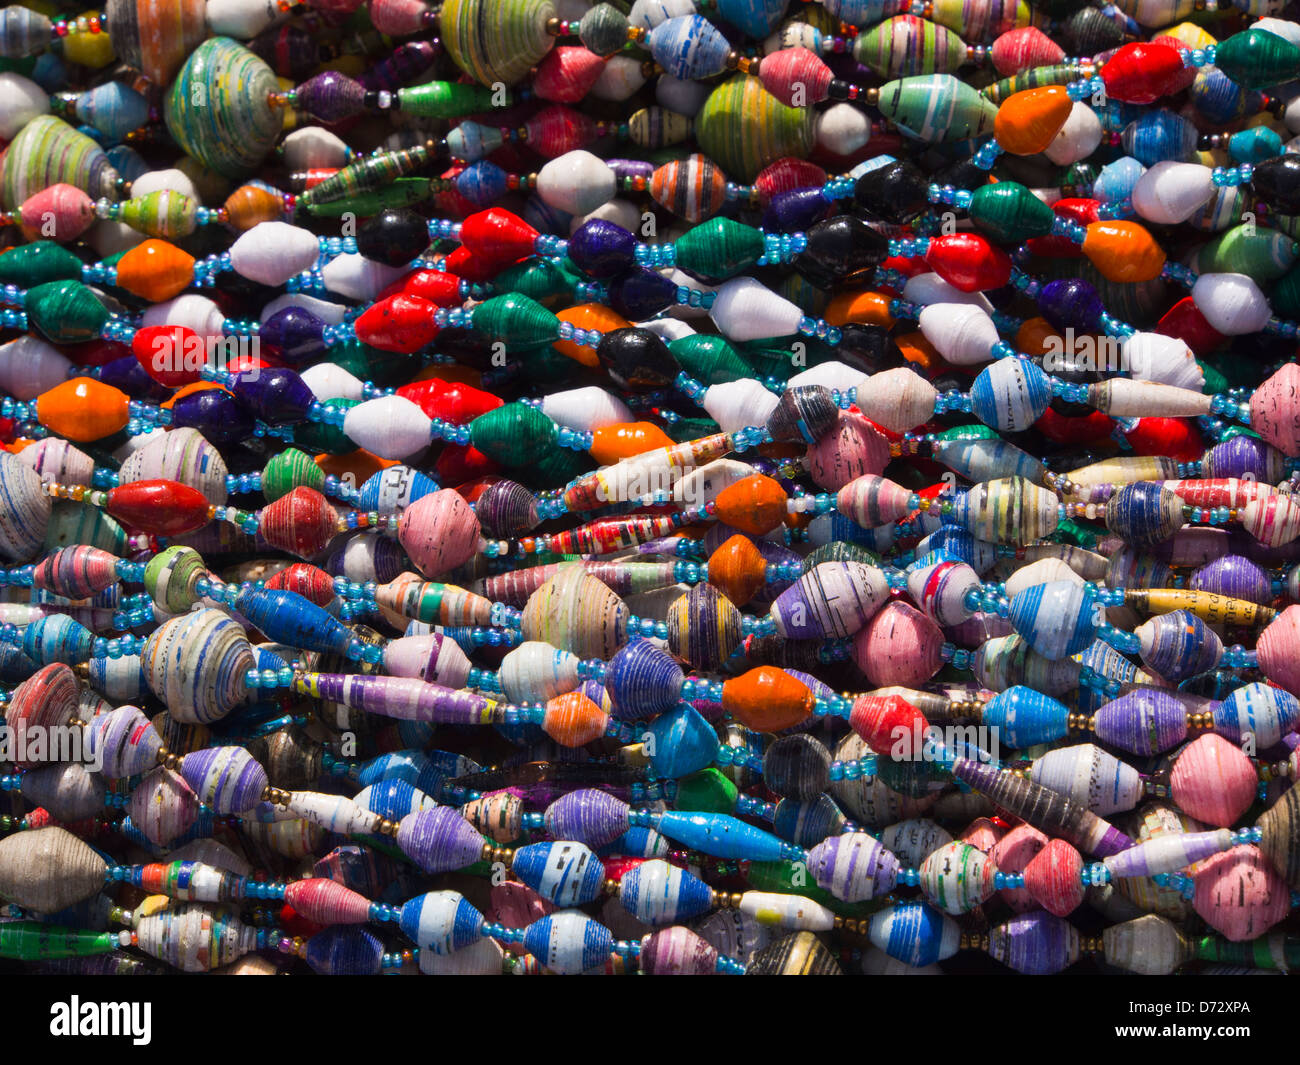 Rows of colourful bead necklaces on display in a flea market in Grunerlokka Oslo Norway Stock Photo